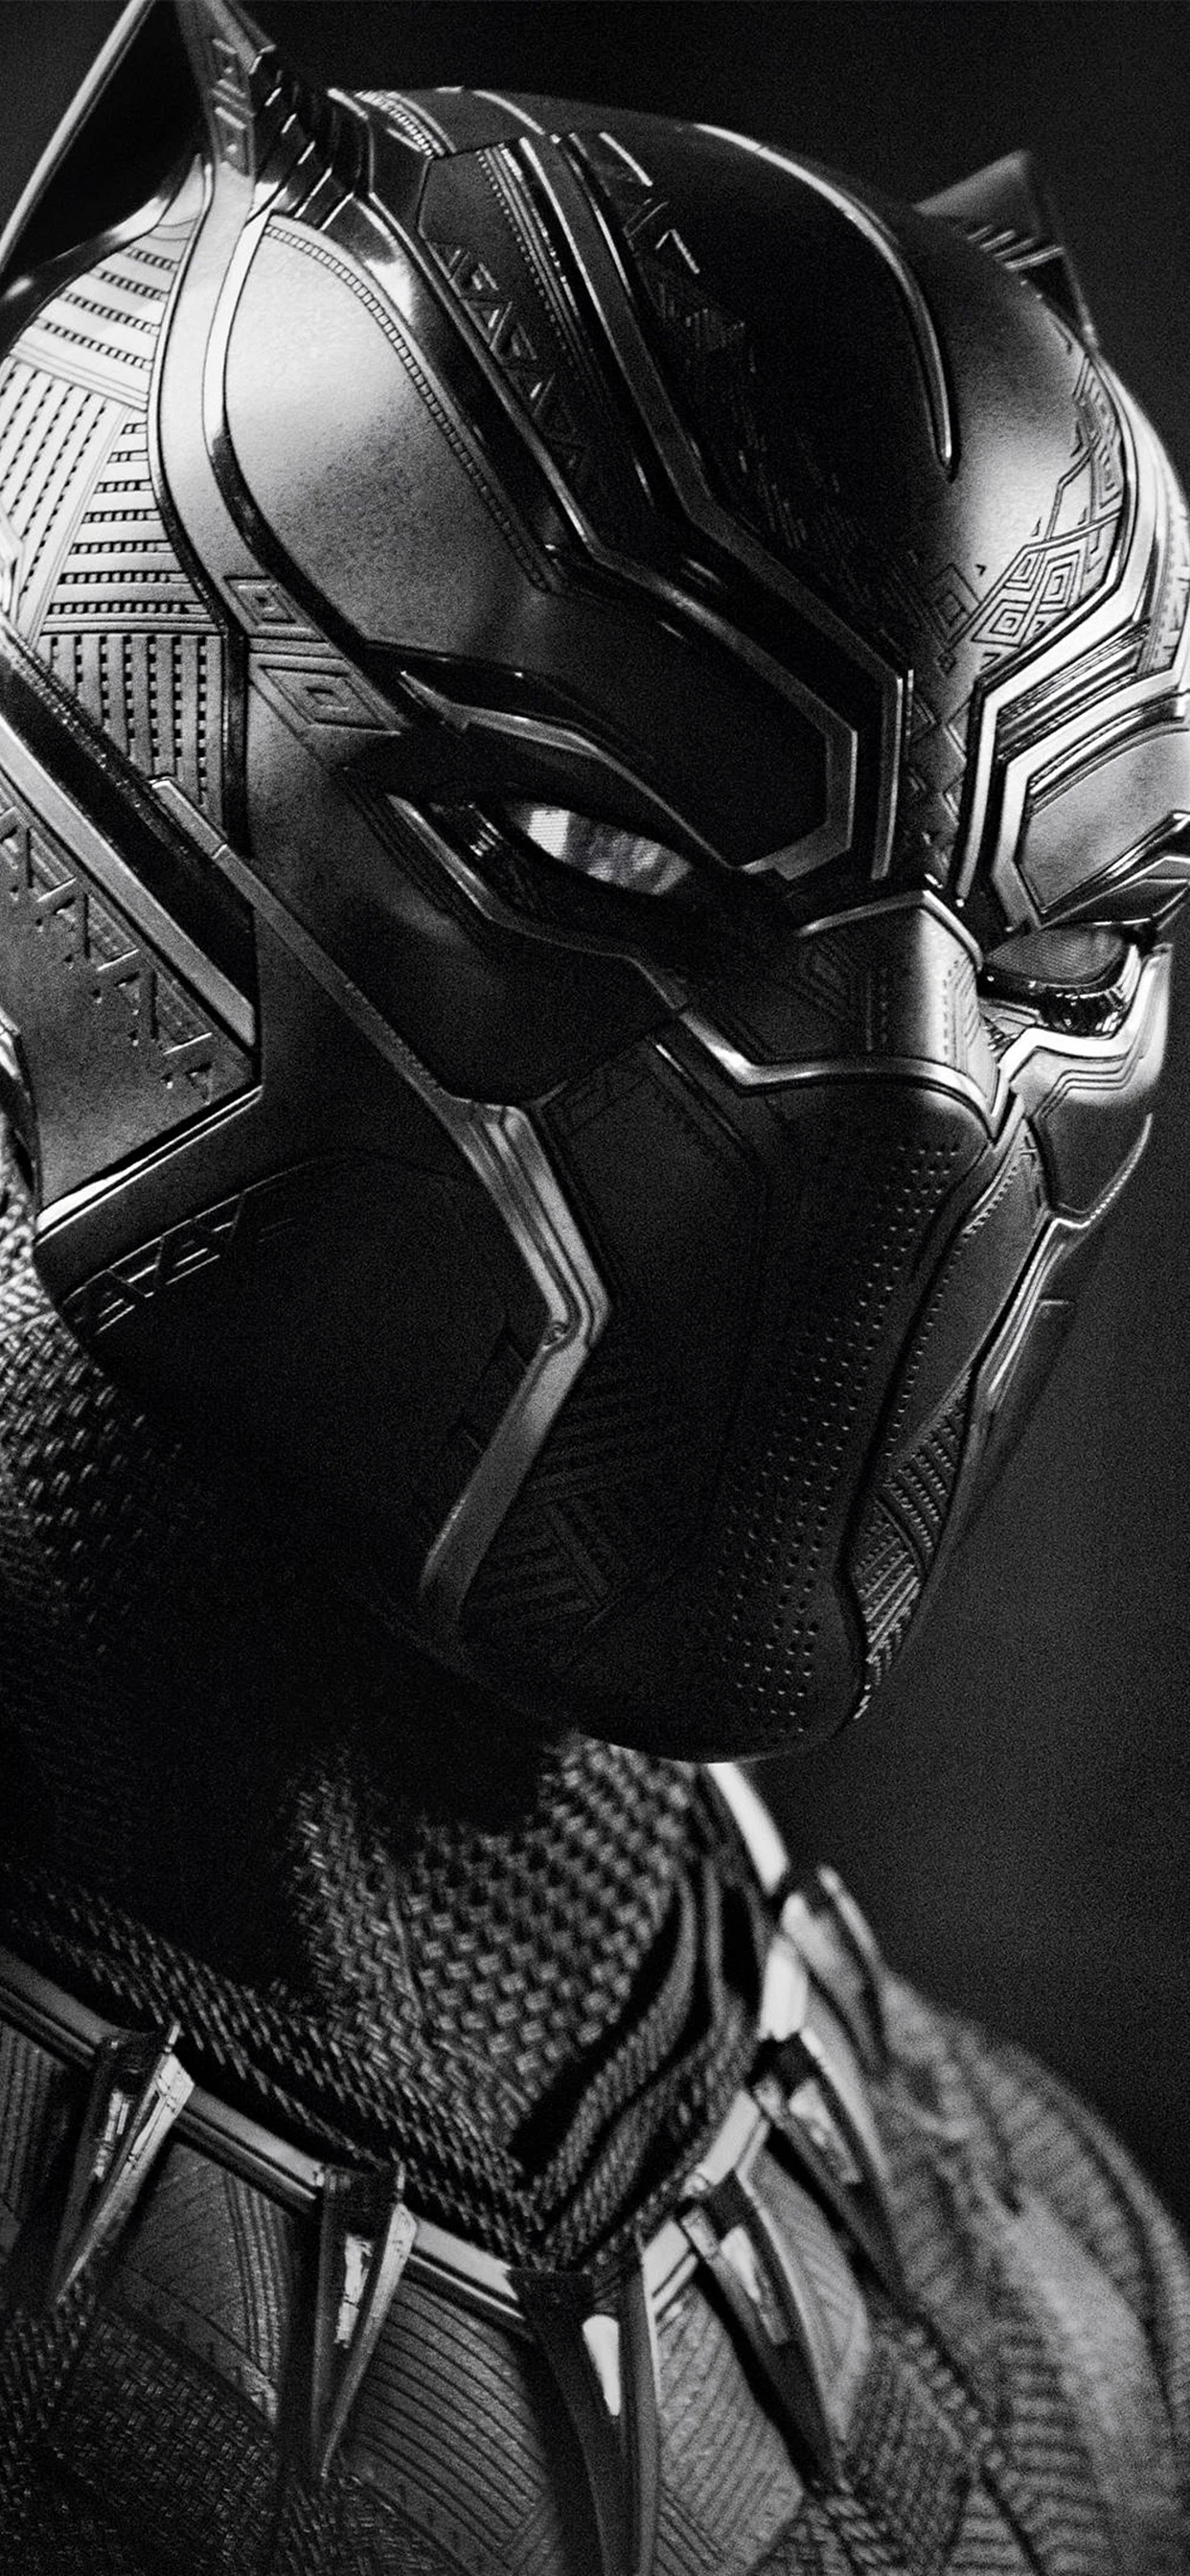 Black Panther Marvel Wallpaper for iPhone 11 Pro Max